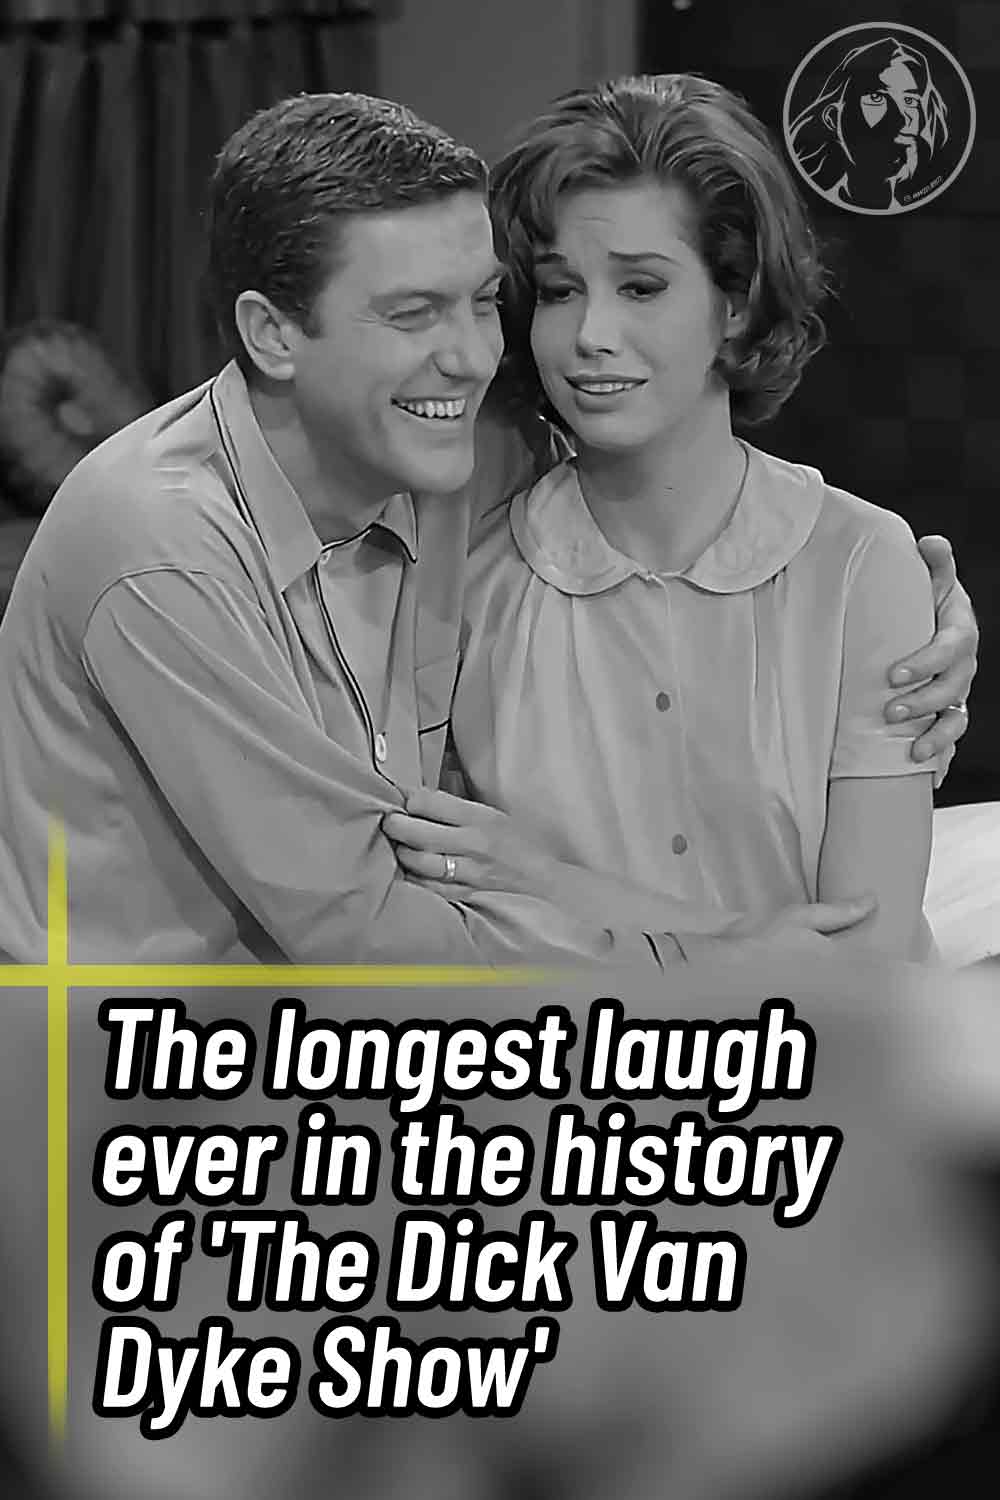 The longest laugh ever in the history of \'The Dick Van Dyke Show\'